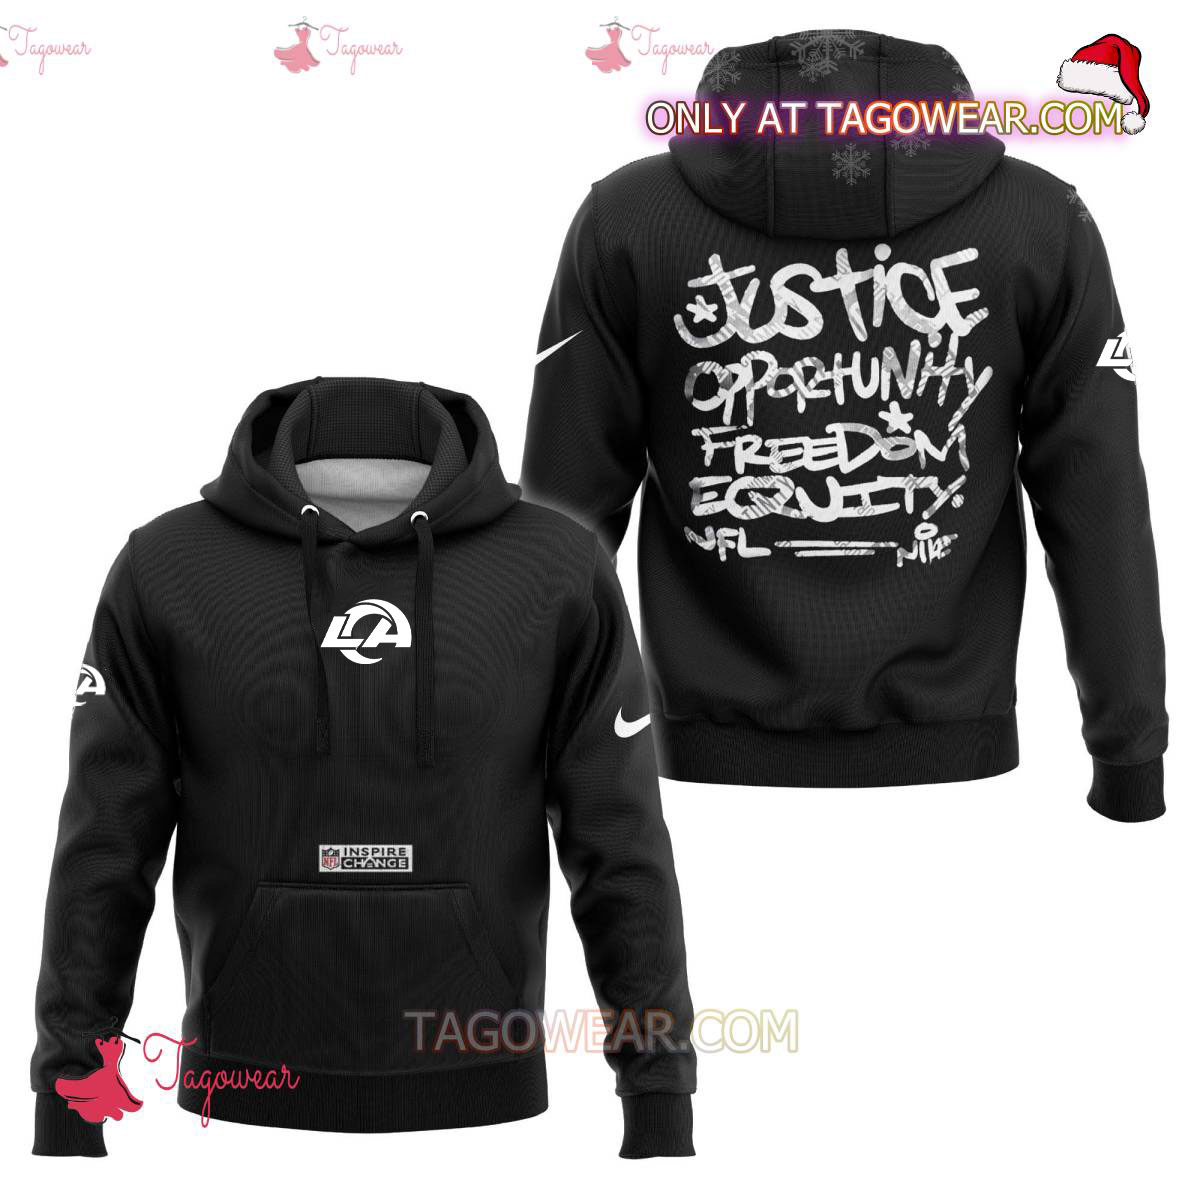 Los Angeles Rams NFL Inspire Change Justice Opportunity Equality Freedom Hoodie